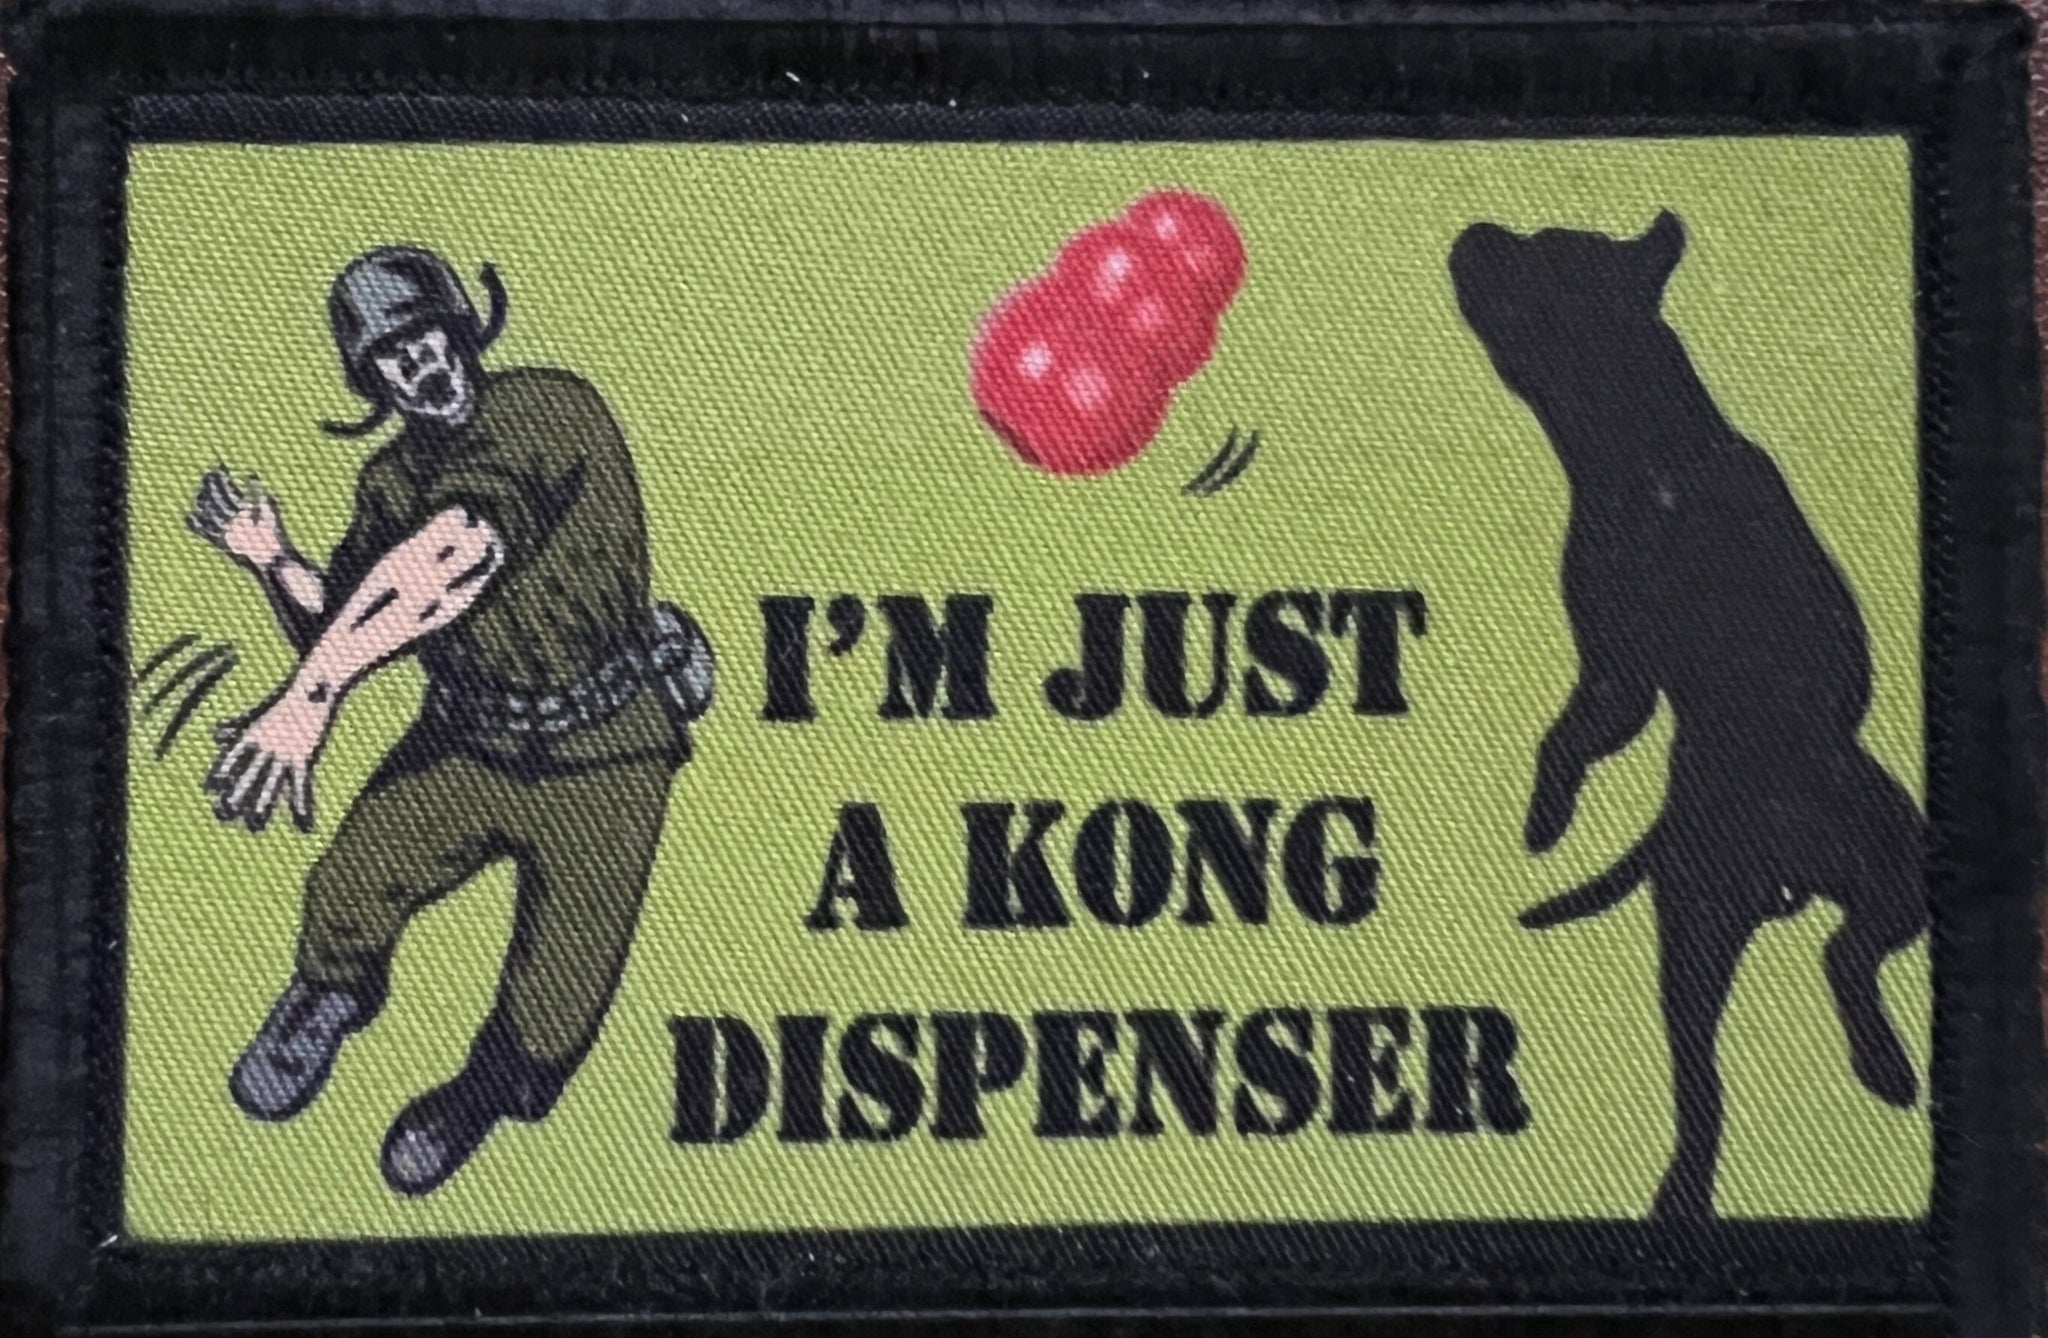  Funny Morale Patches